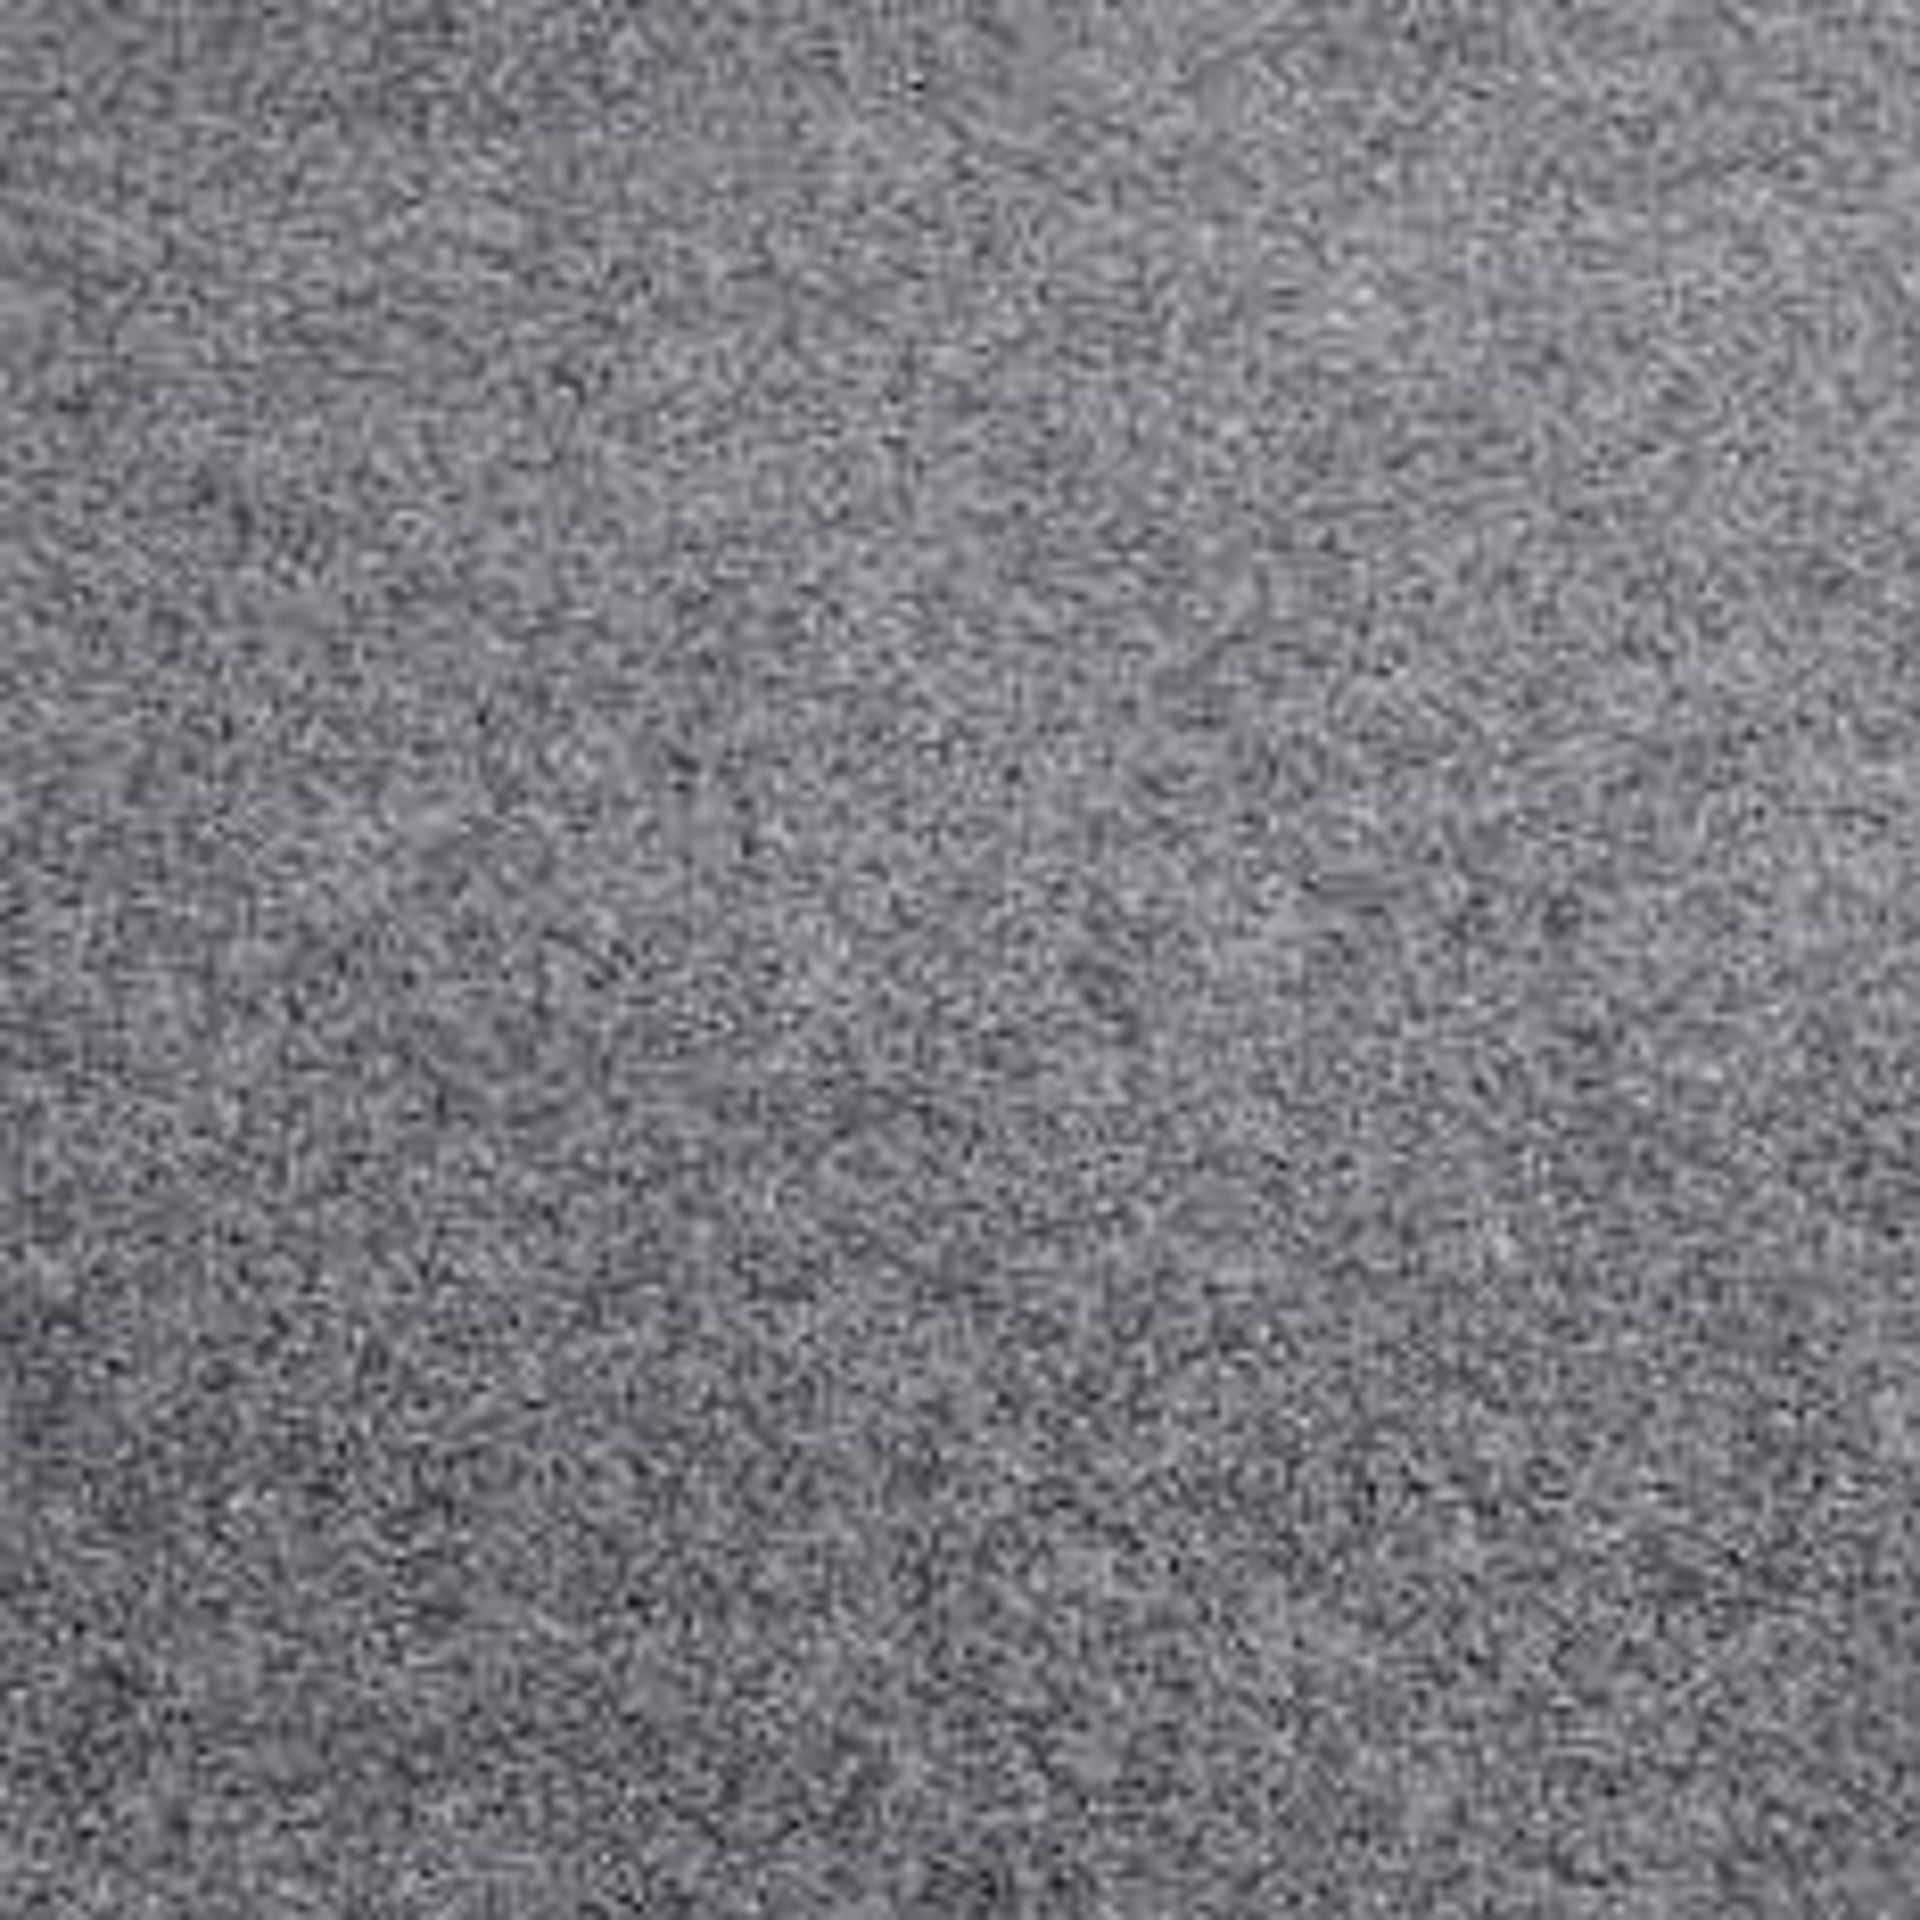 RRP £380 Bagged And Rolled Trojan DK Grey 4m x 4.50m Carpet (097567) (We Do Not Ship Carpets)